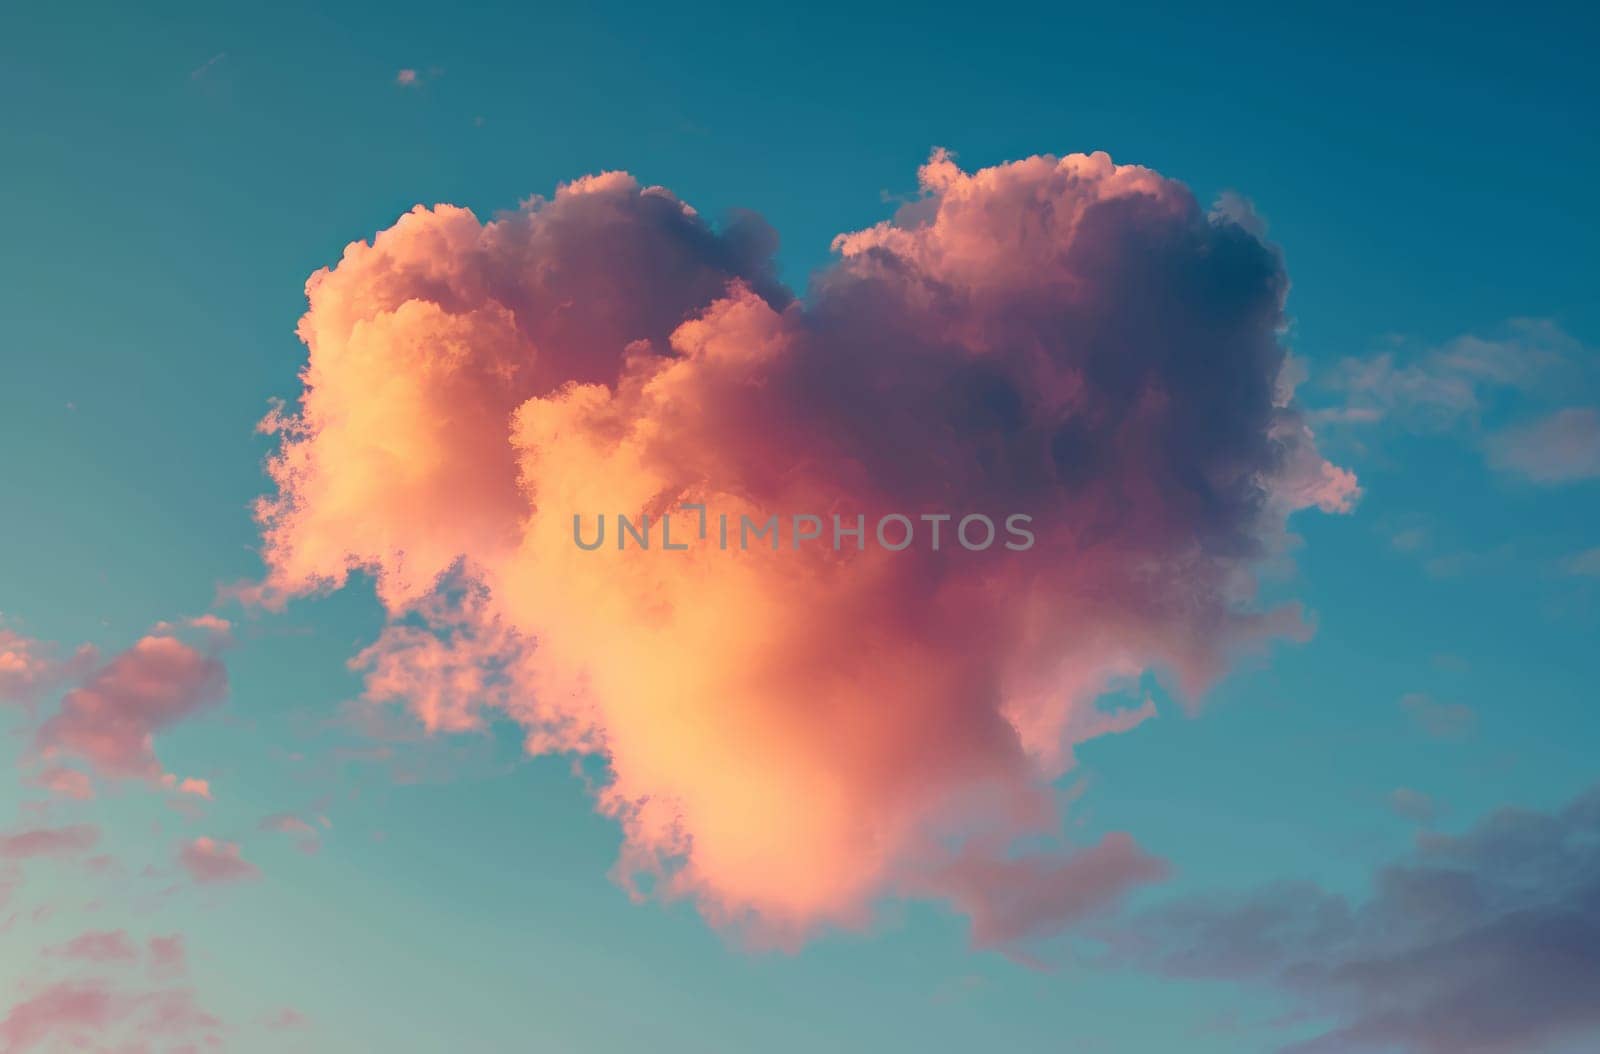 A natural cloud formation takes the enchanting shape of a heart in the clear blue sky